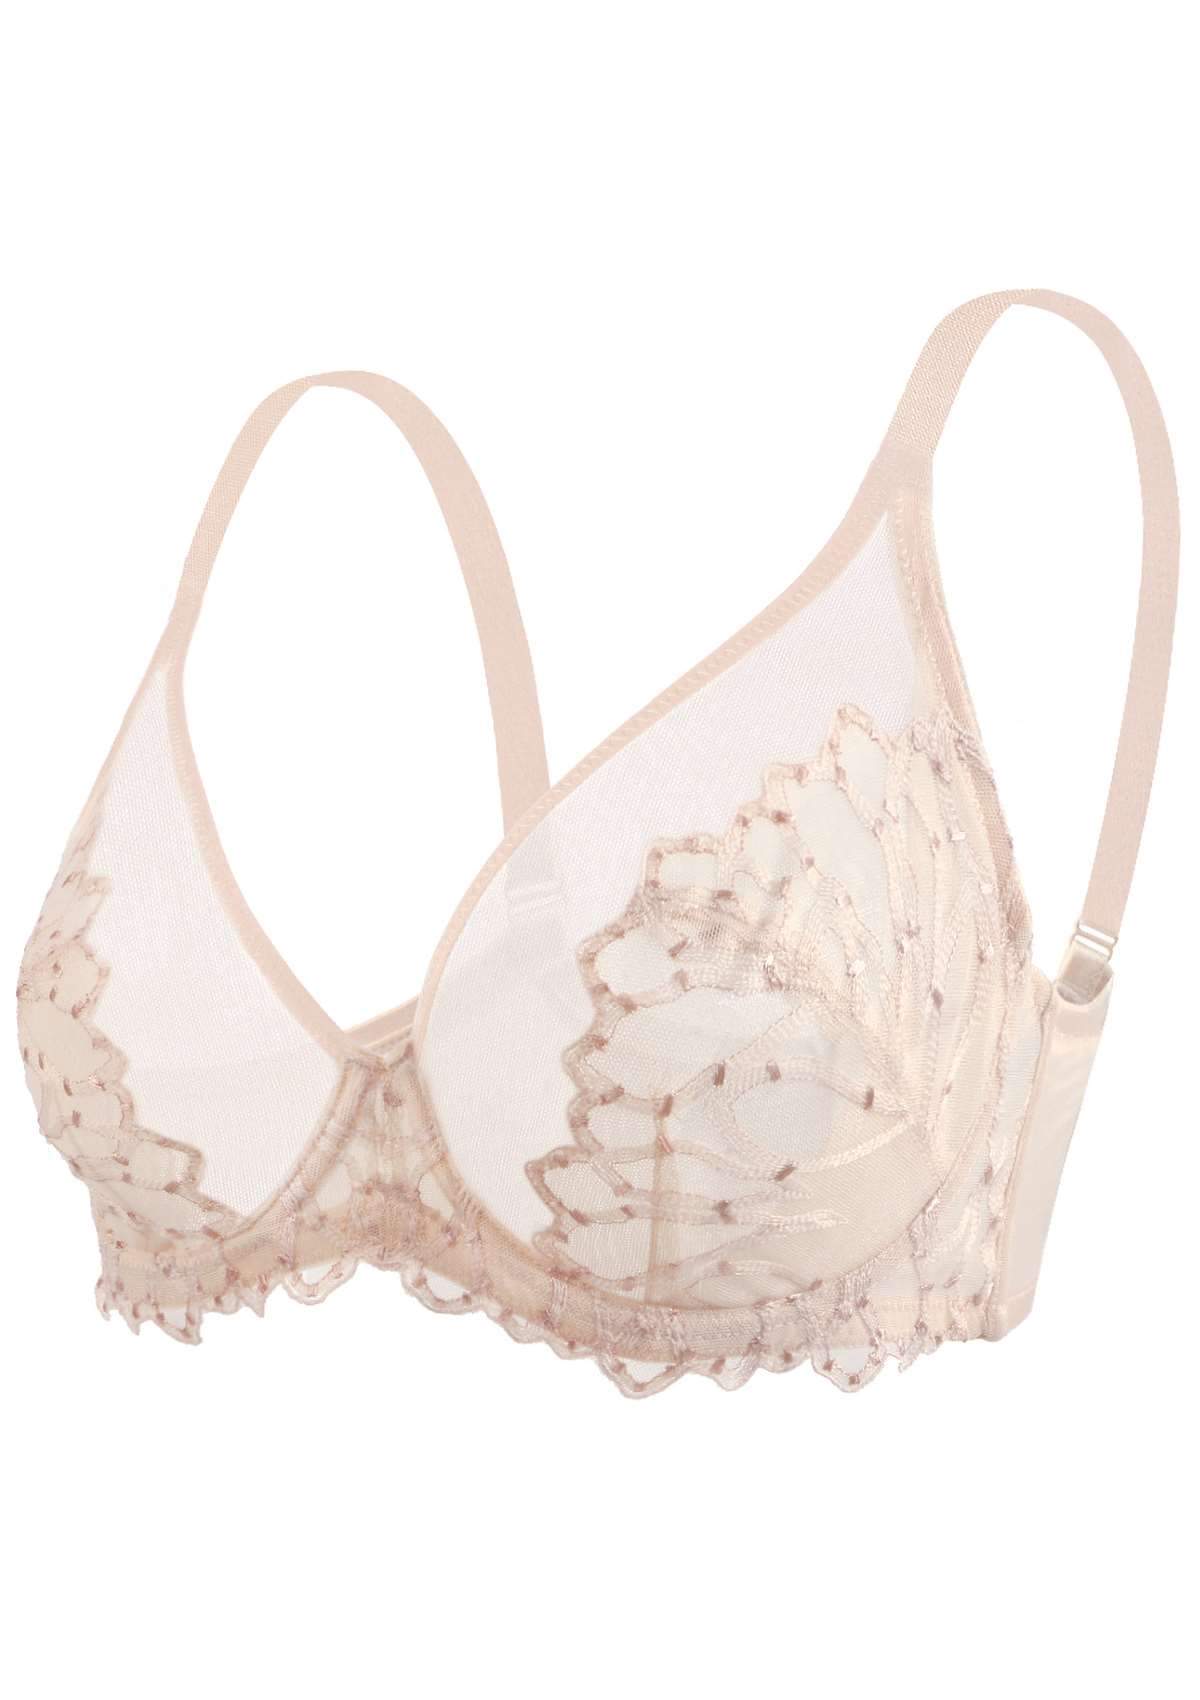 HSIA Chrysanthemum Plus Size Lace Bra: Back Support Bra For Posture - Light Pink / 34 / C